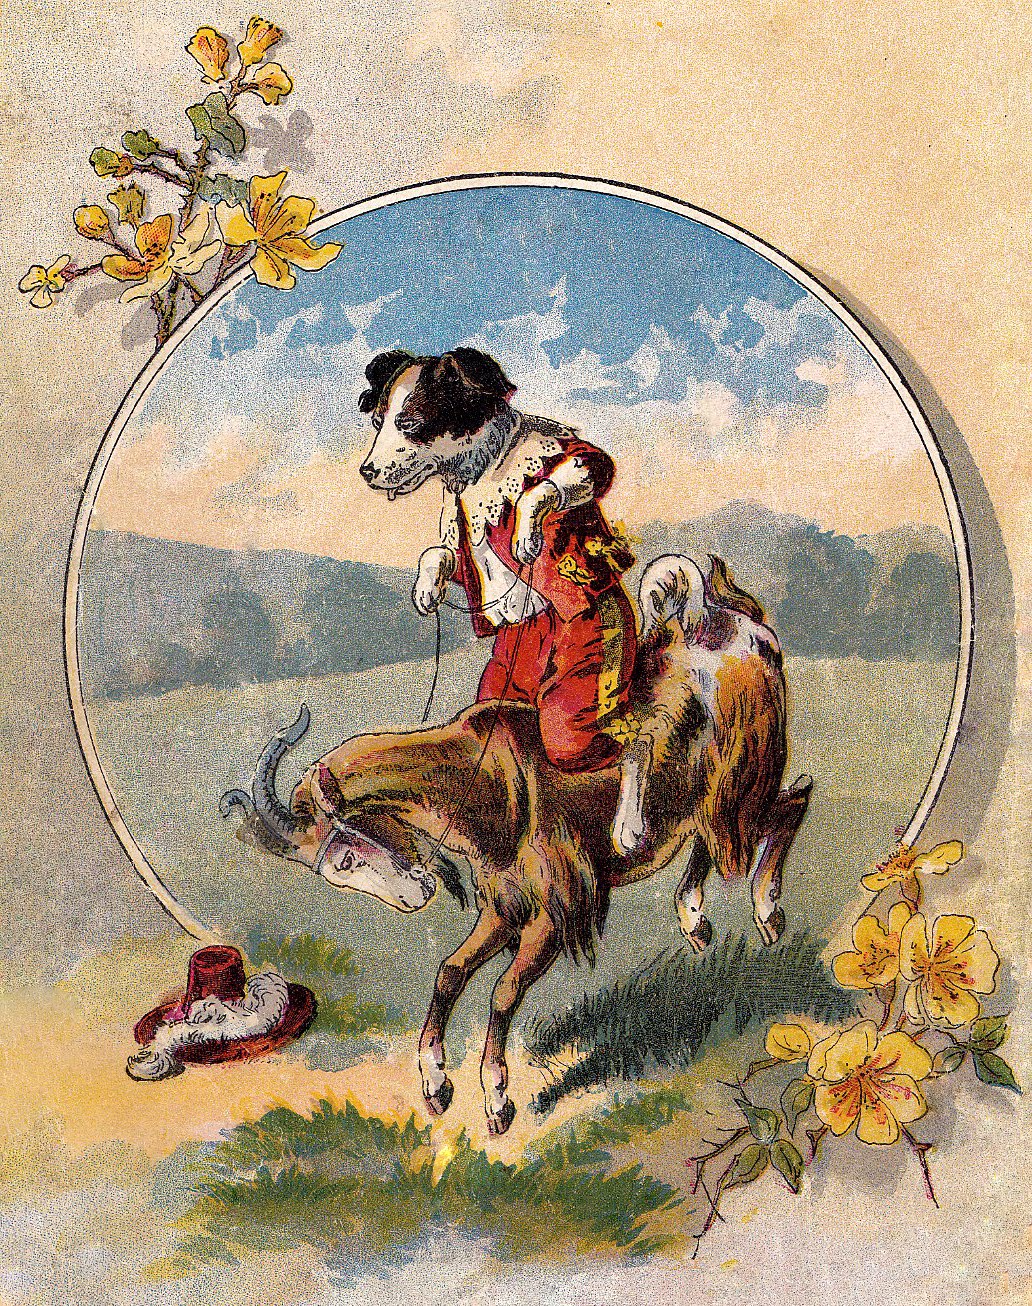 Vintage Image - Cute Dog rides Goat - The Graphics Fairy